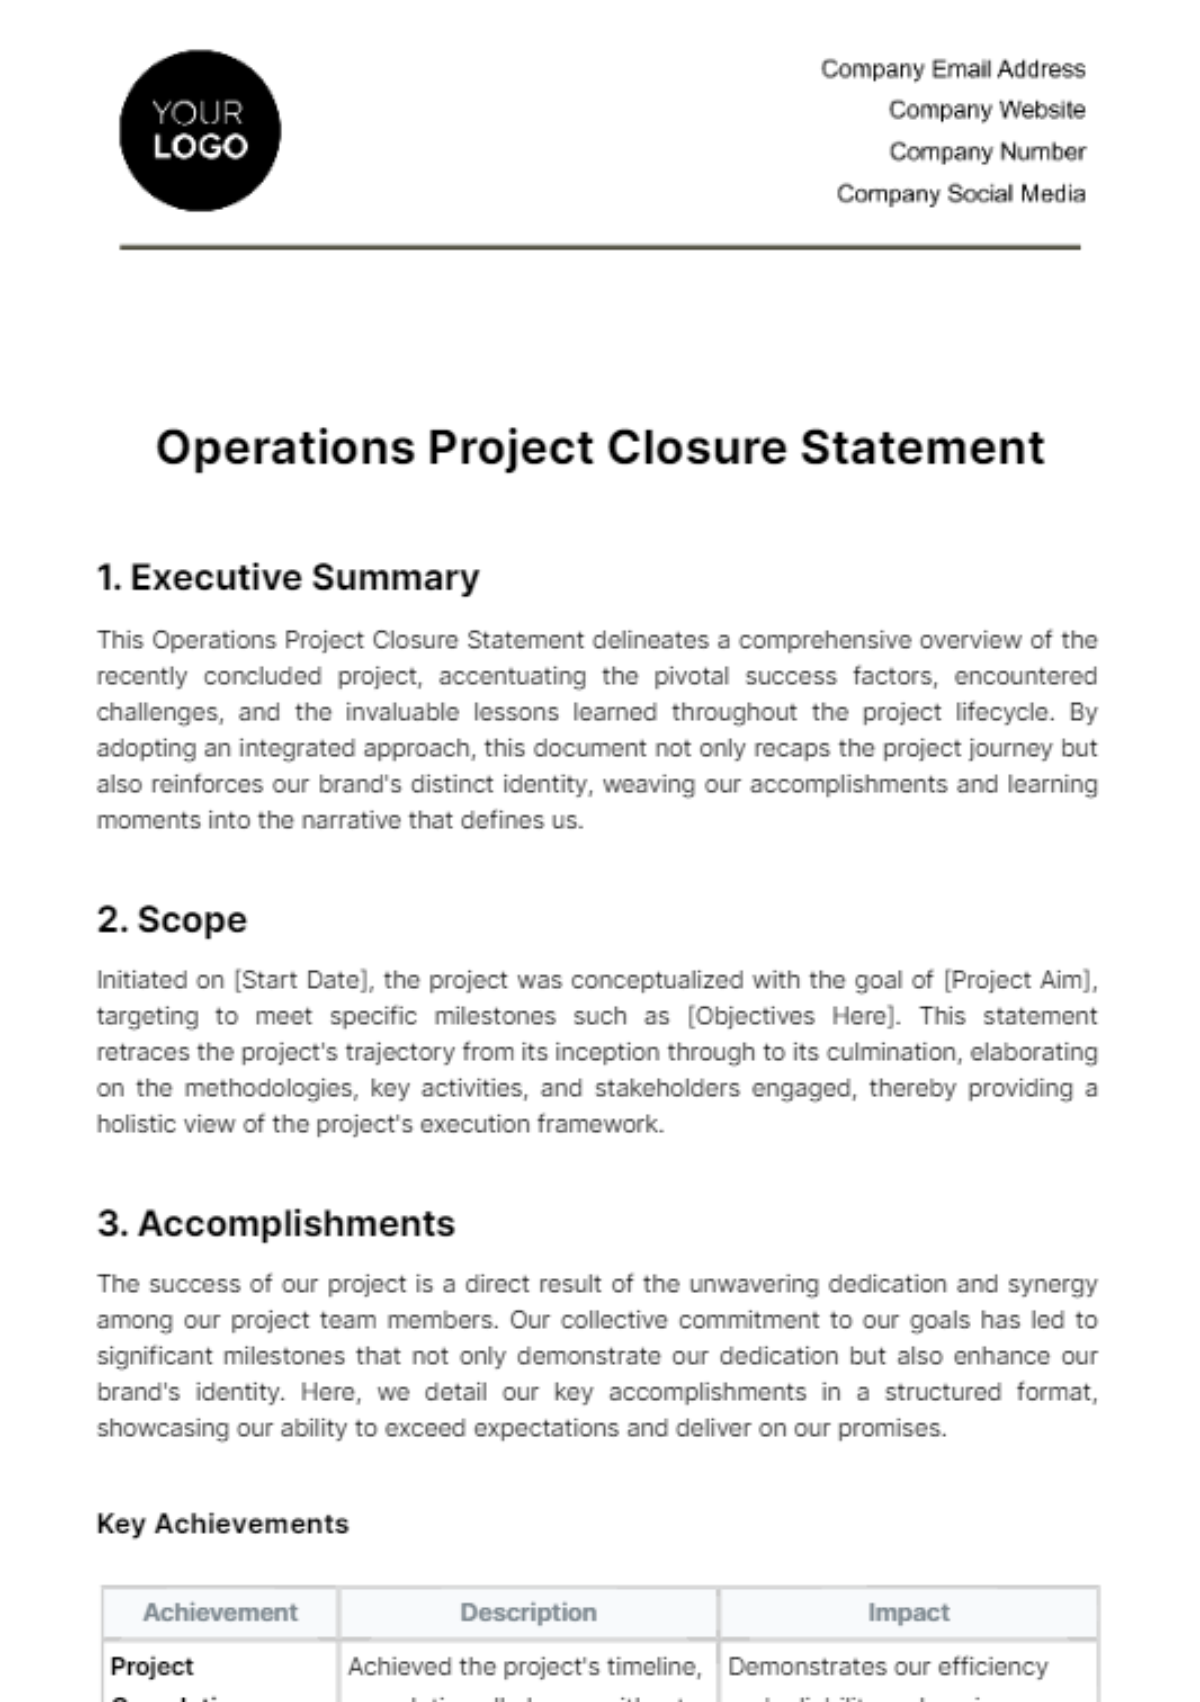 Operations Project Closure Statement Template